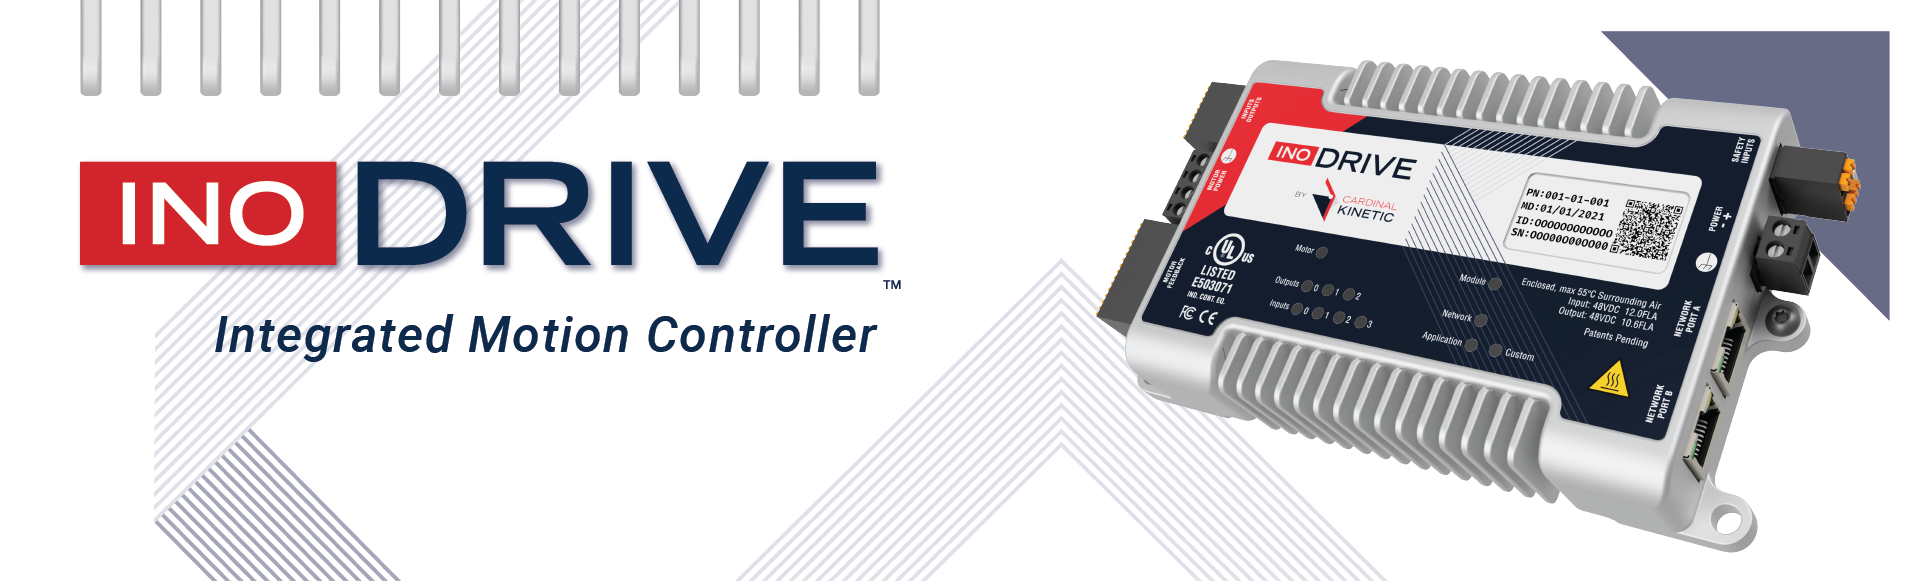 Ino Drive Integrated Motion Controller